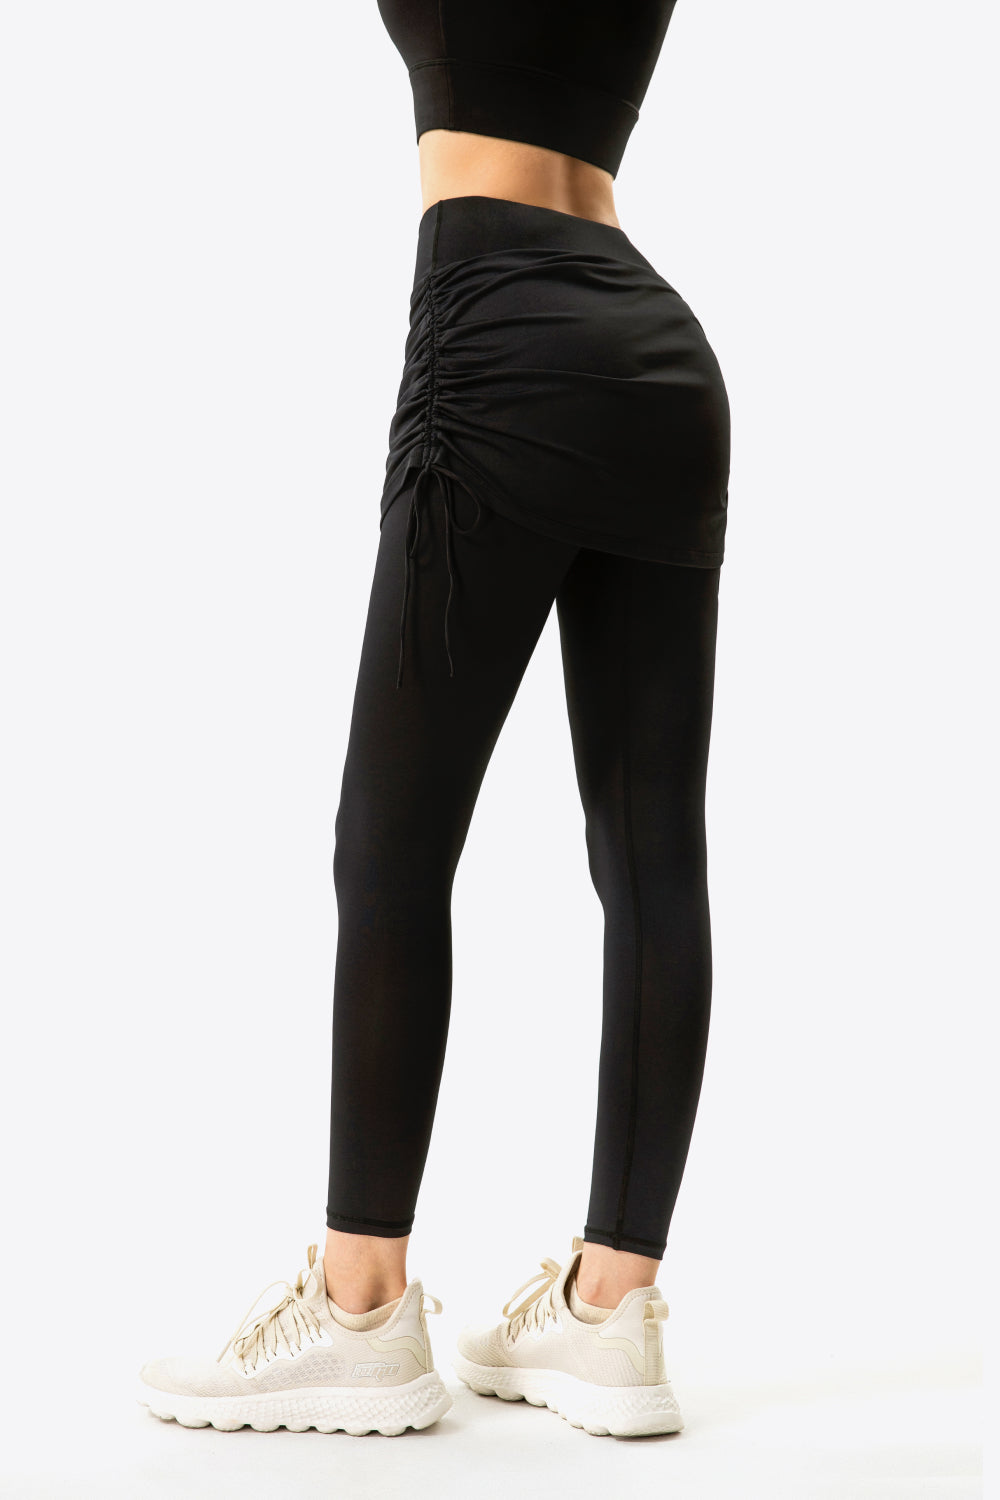 Drawstring Ruched Faux Layered Yoga Leggings – The Cereal Box Store